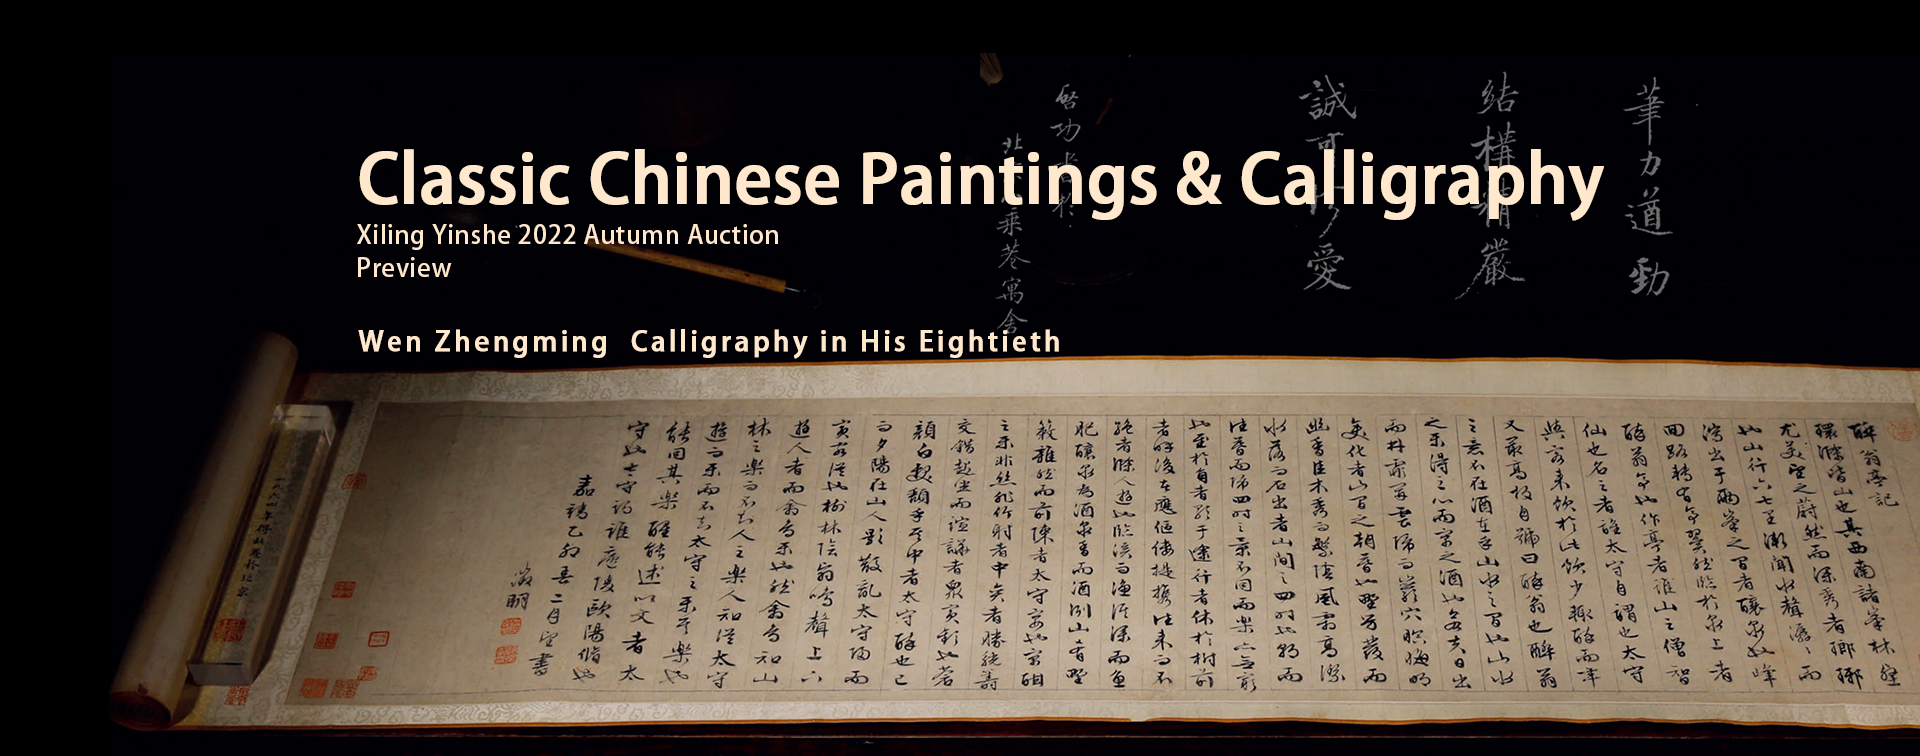 Xiling Yinshe 2022 Autumn Auction | Classical Chinese Paintings & Calligraphy